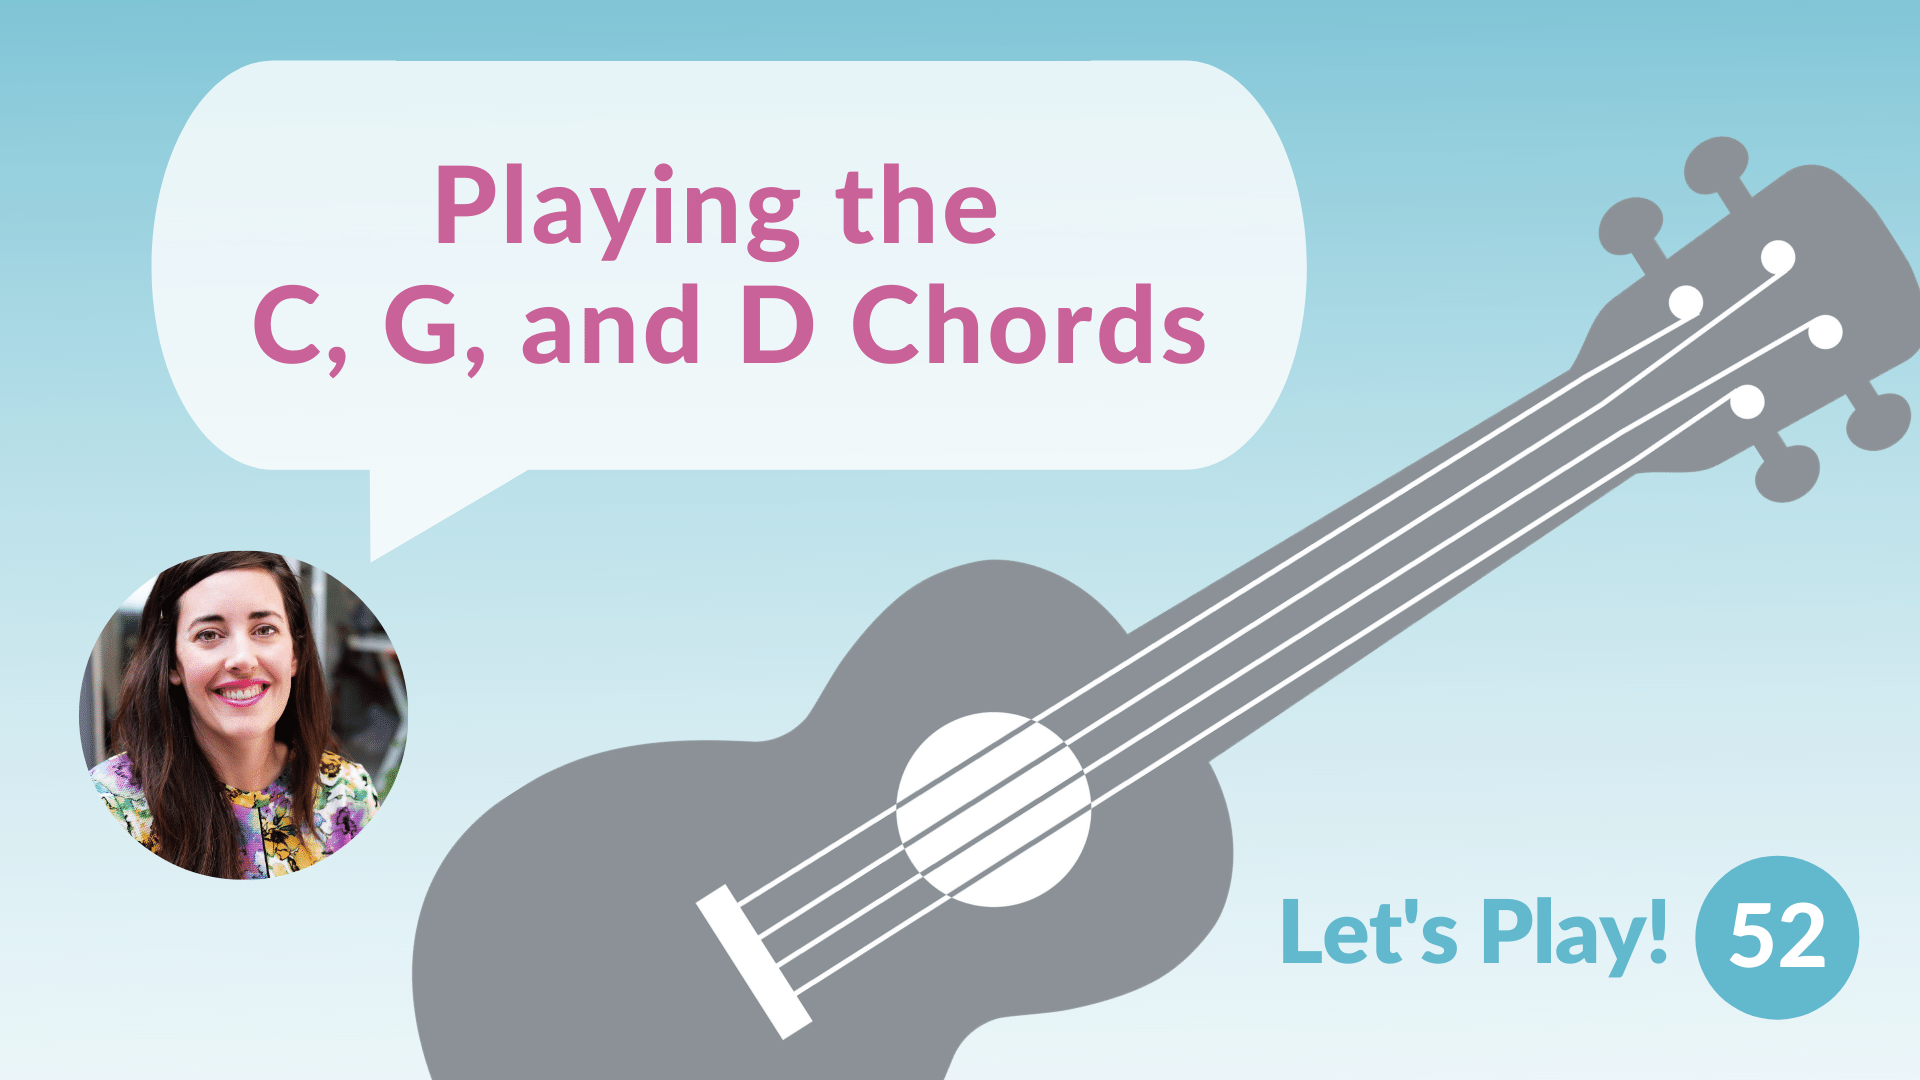 Play the 1, 2, + 5 Chords in the Key of C